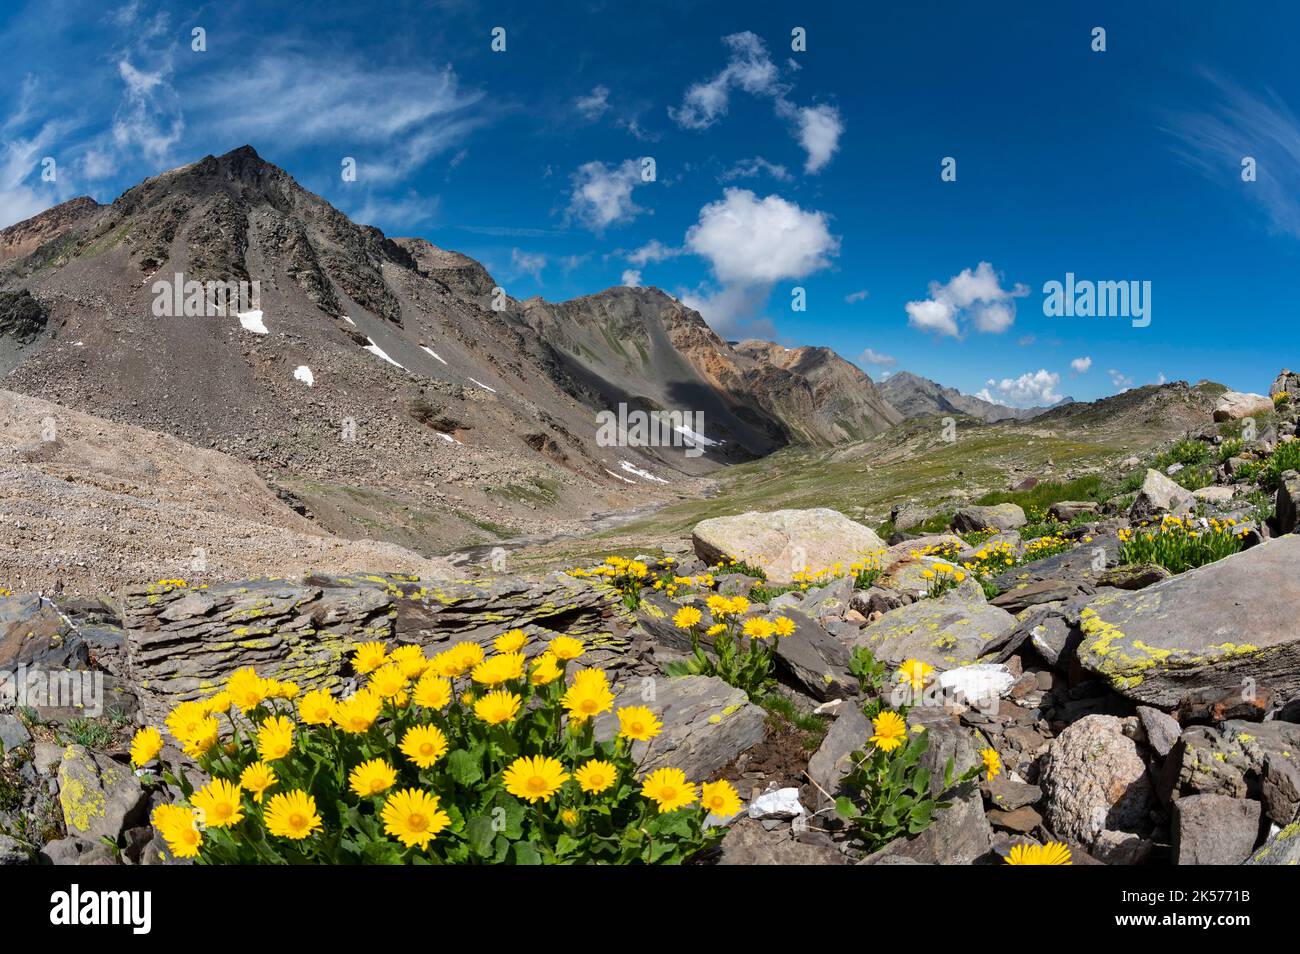 France, Savoie, Valmeinier, Thabor massif, Thabor tower trek, Doronic flowers in the wild valley of the Cheval Blanc and the tip of Terre Rouge Stock Photo